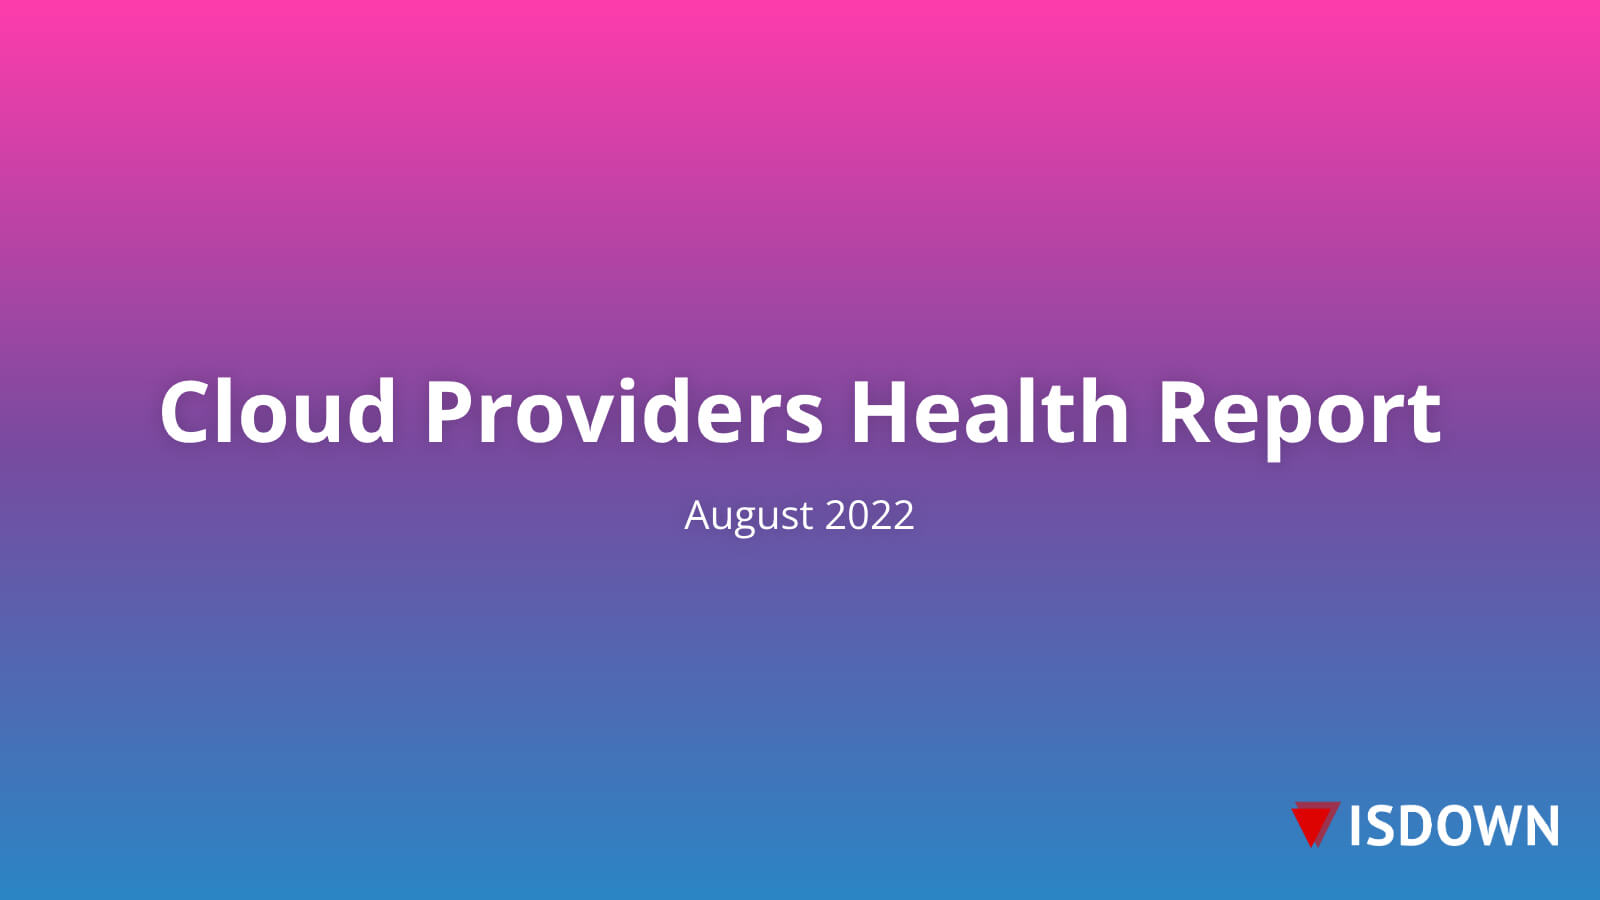 Cloud Providers Health Report - August 2022